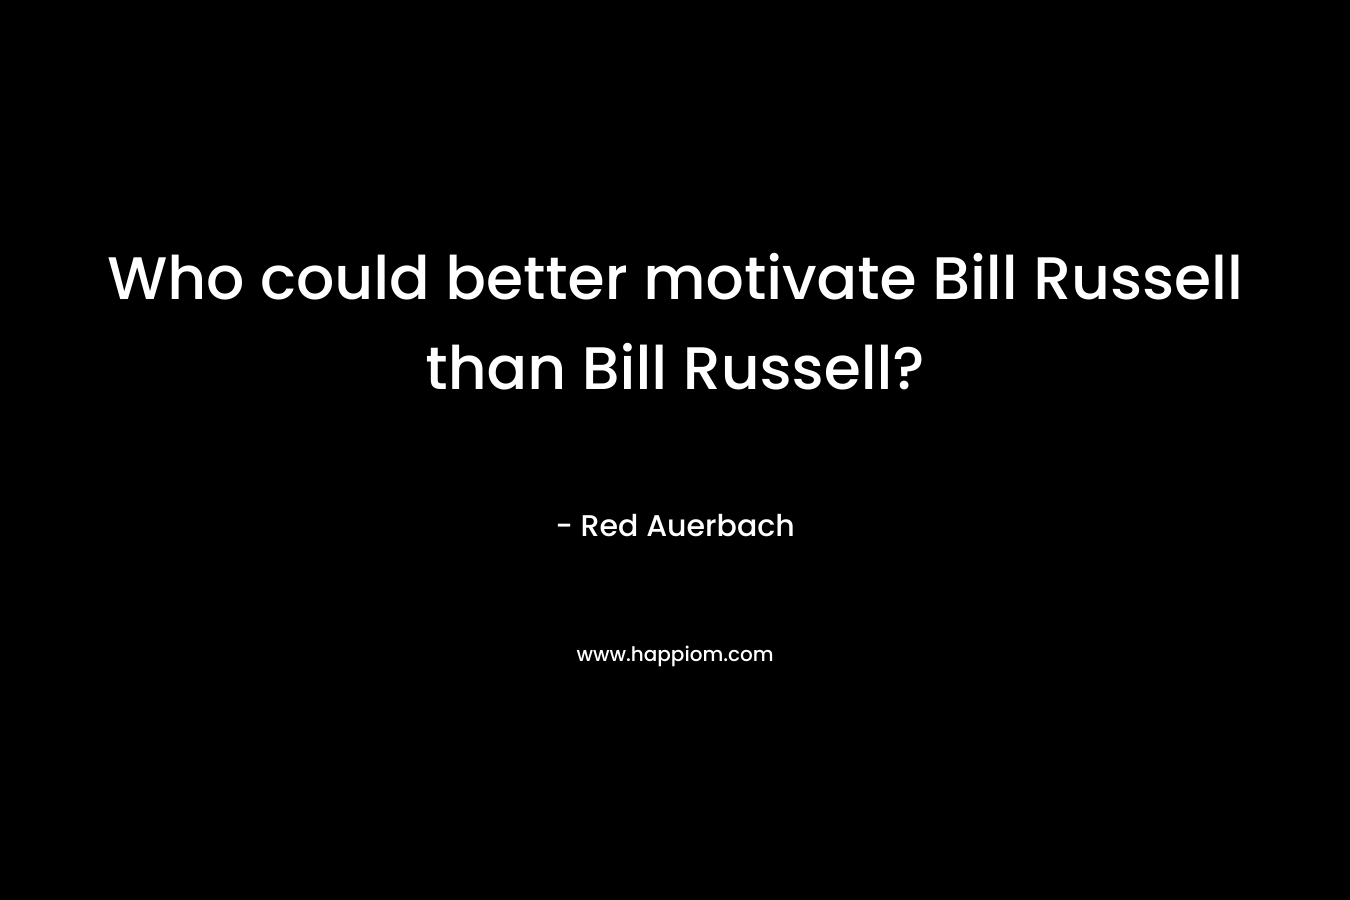 Who could better motivate Bill Russell than Bill Russell?